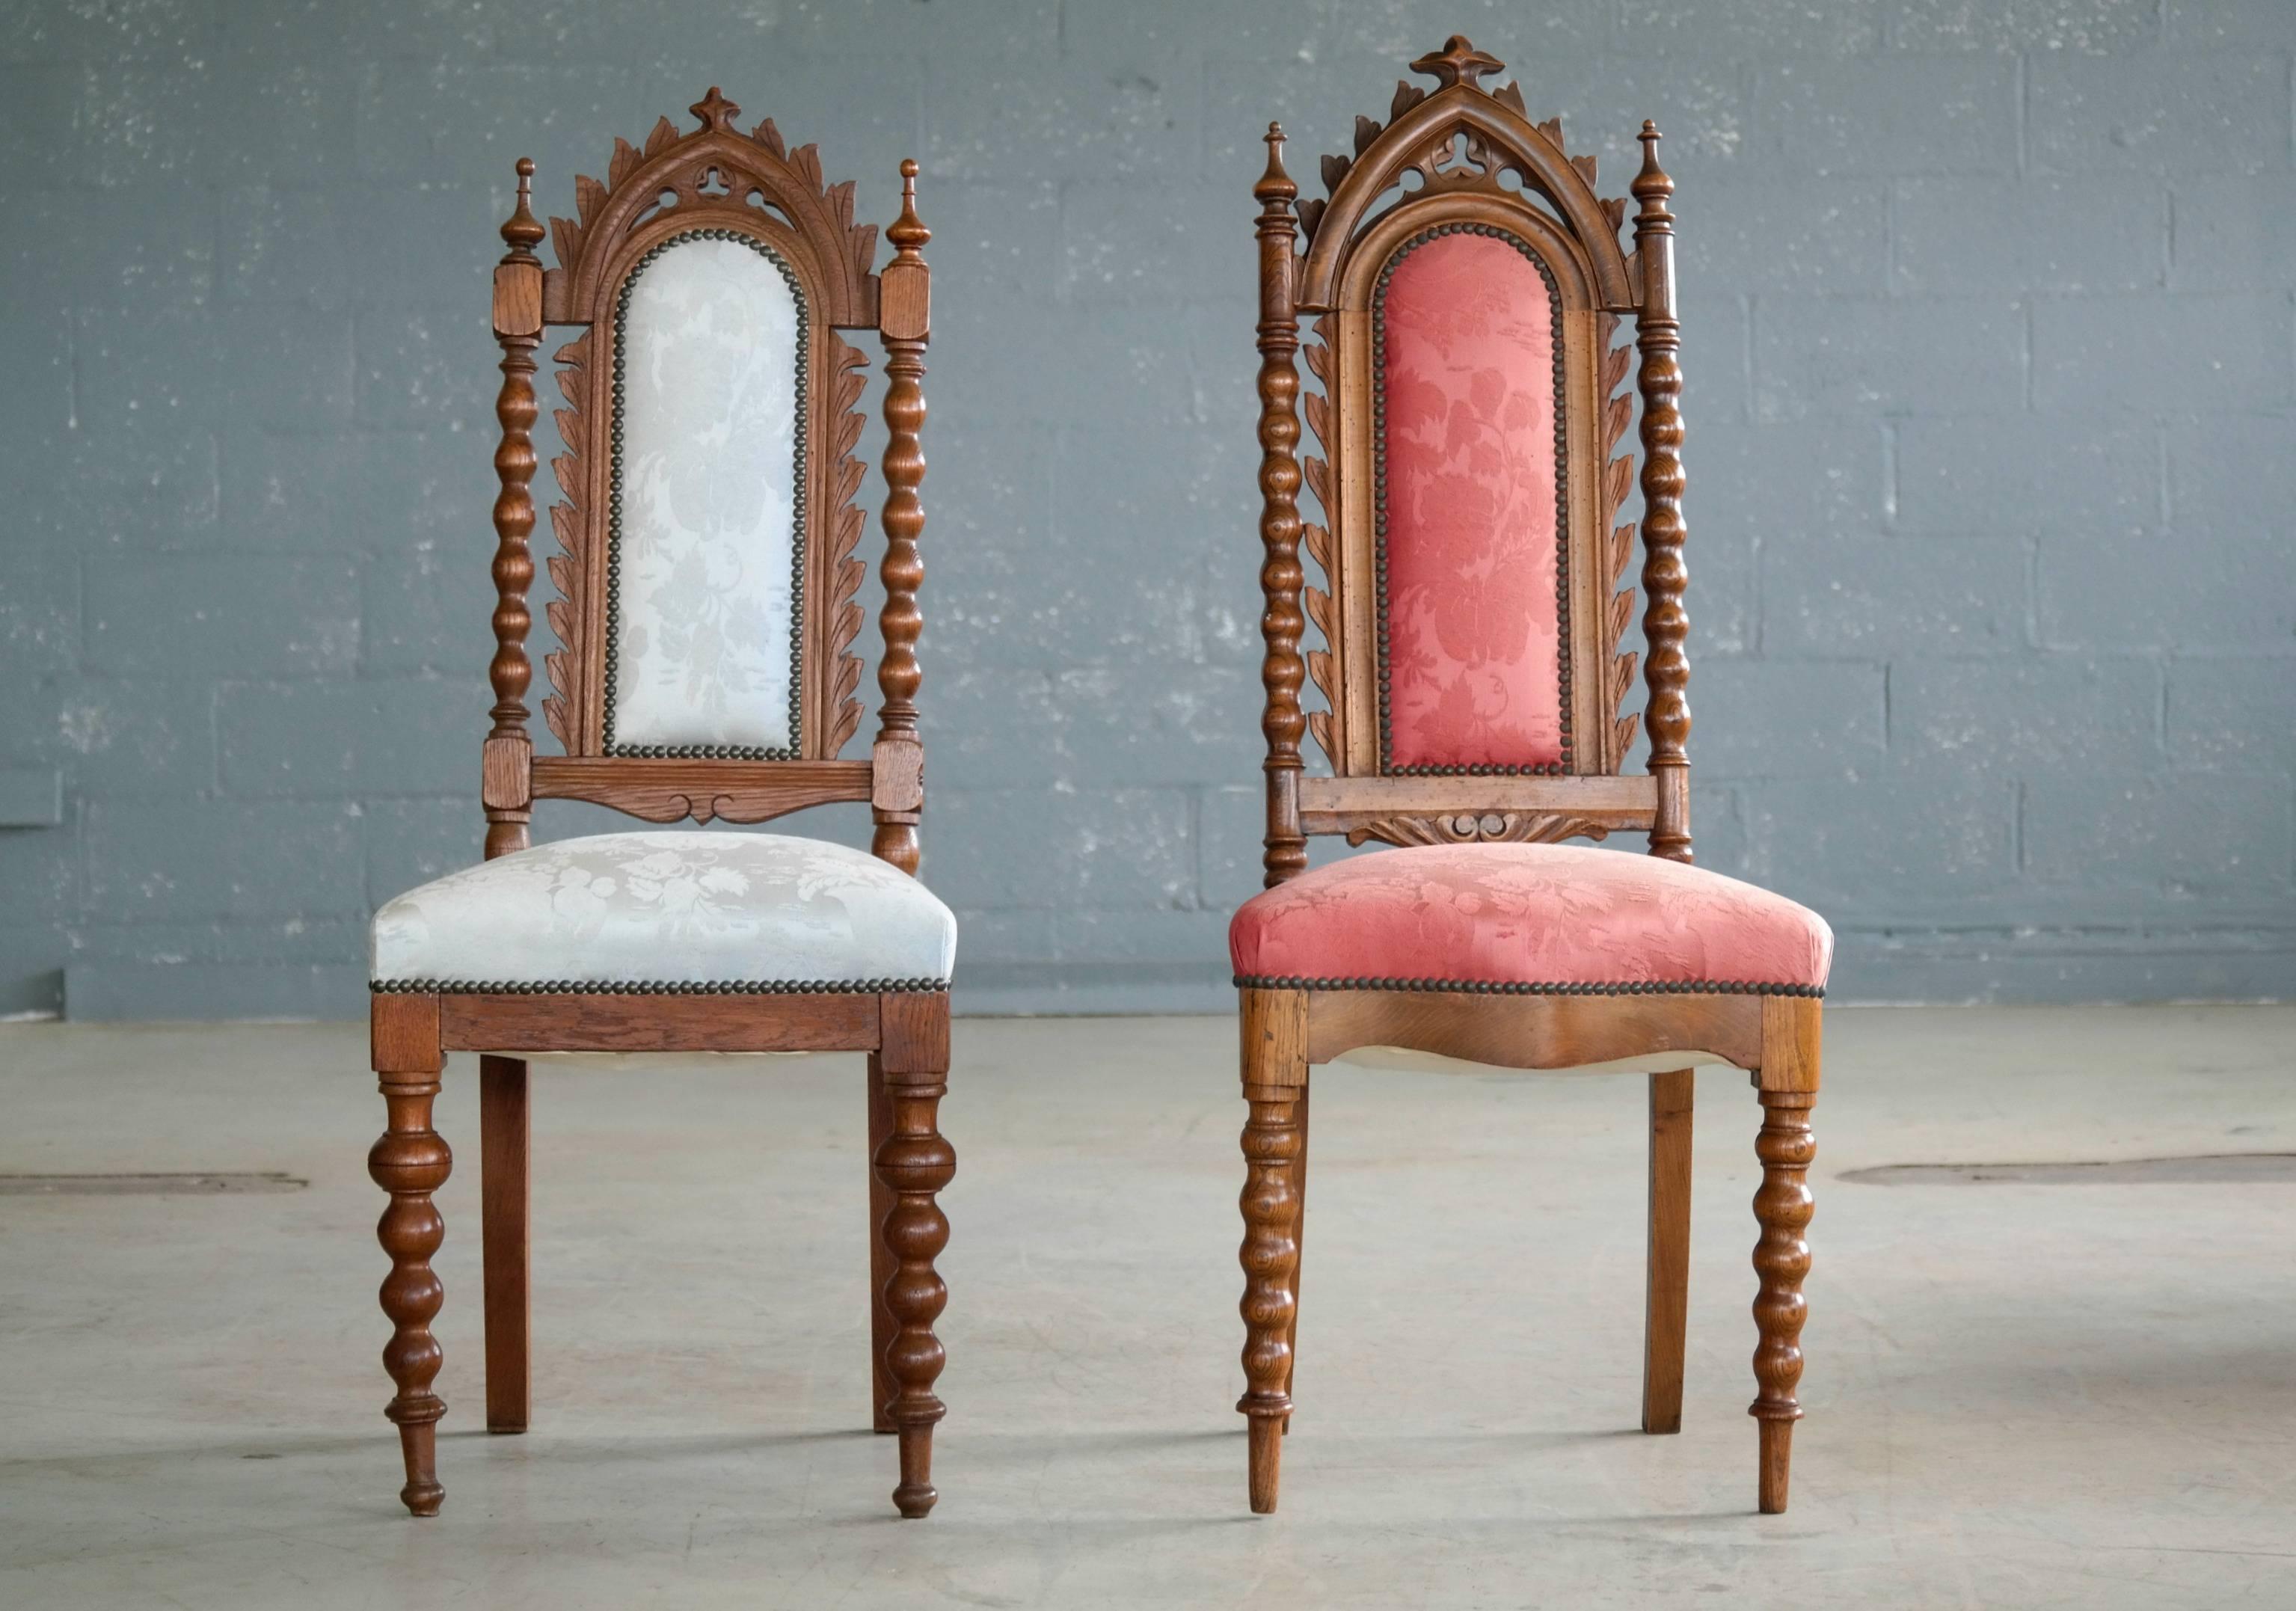 Beautiful pair of Danish early 20th century neo-Gothic side chairs in carved polished oak in the style of Thorvald Bindesboll. While the chairs are not a perfect pair they are just perfect together - like the king and the queen of the manor. Very